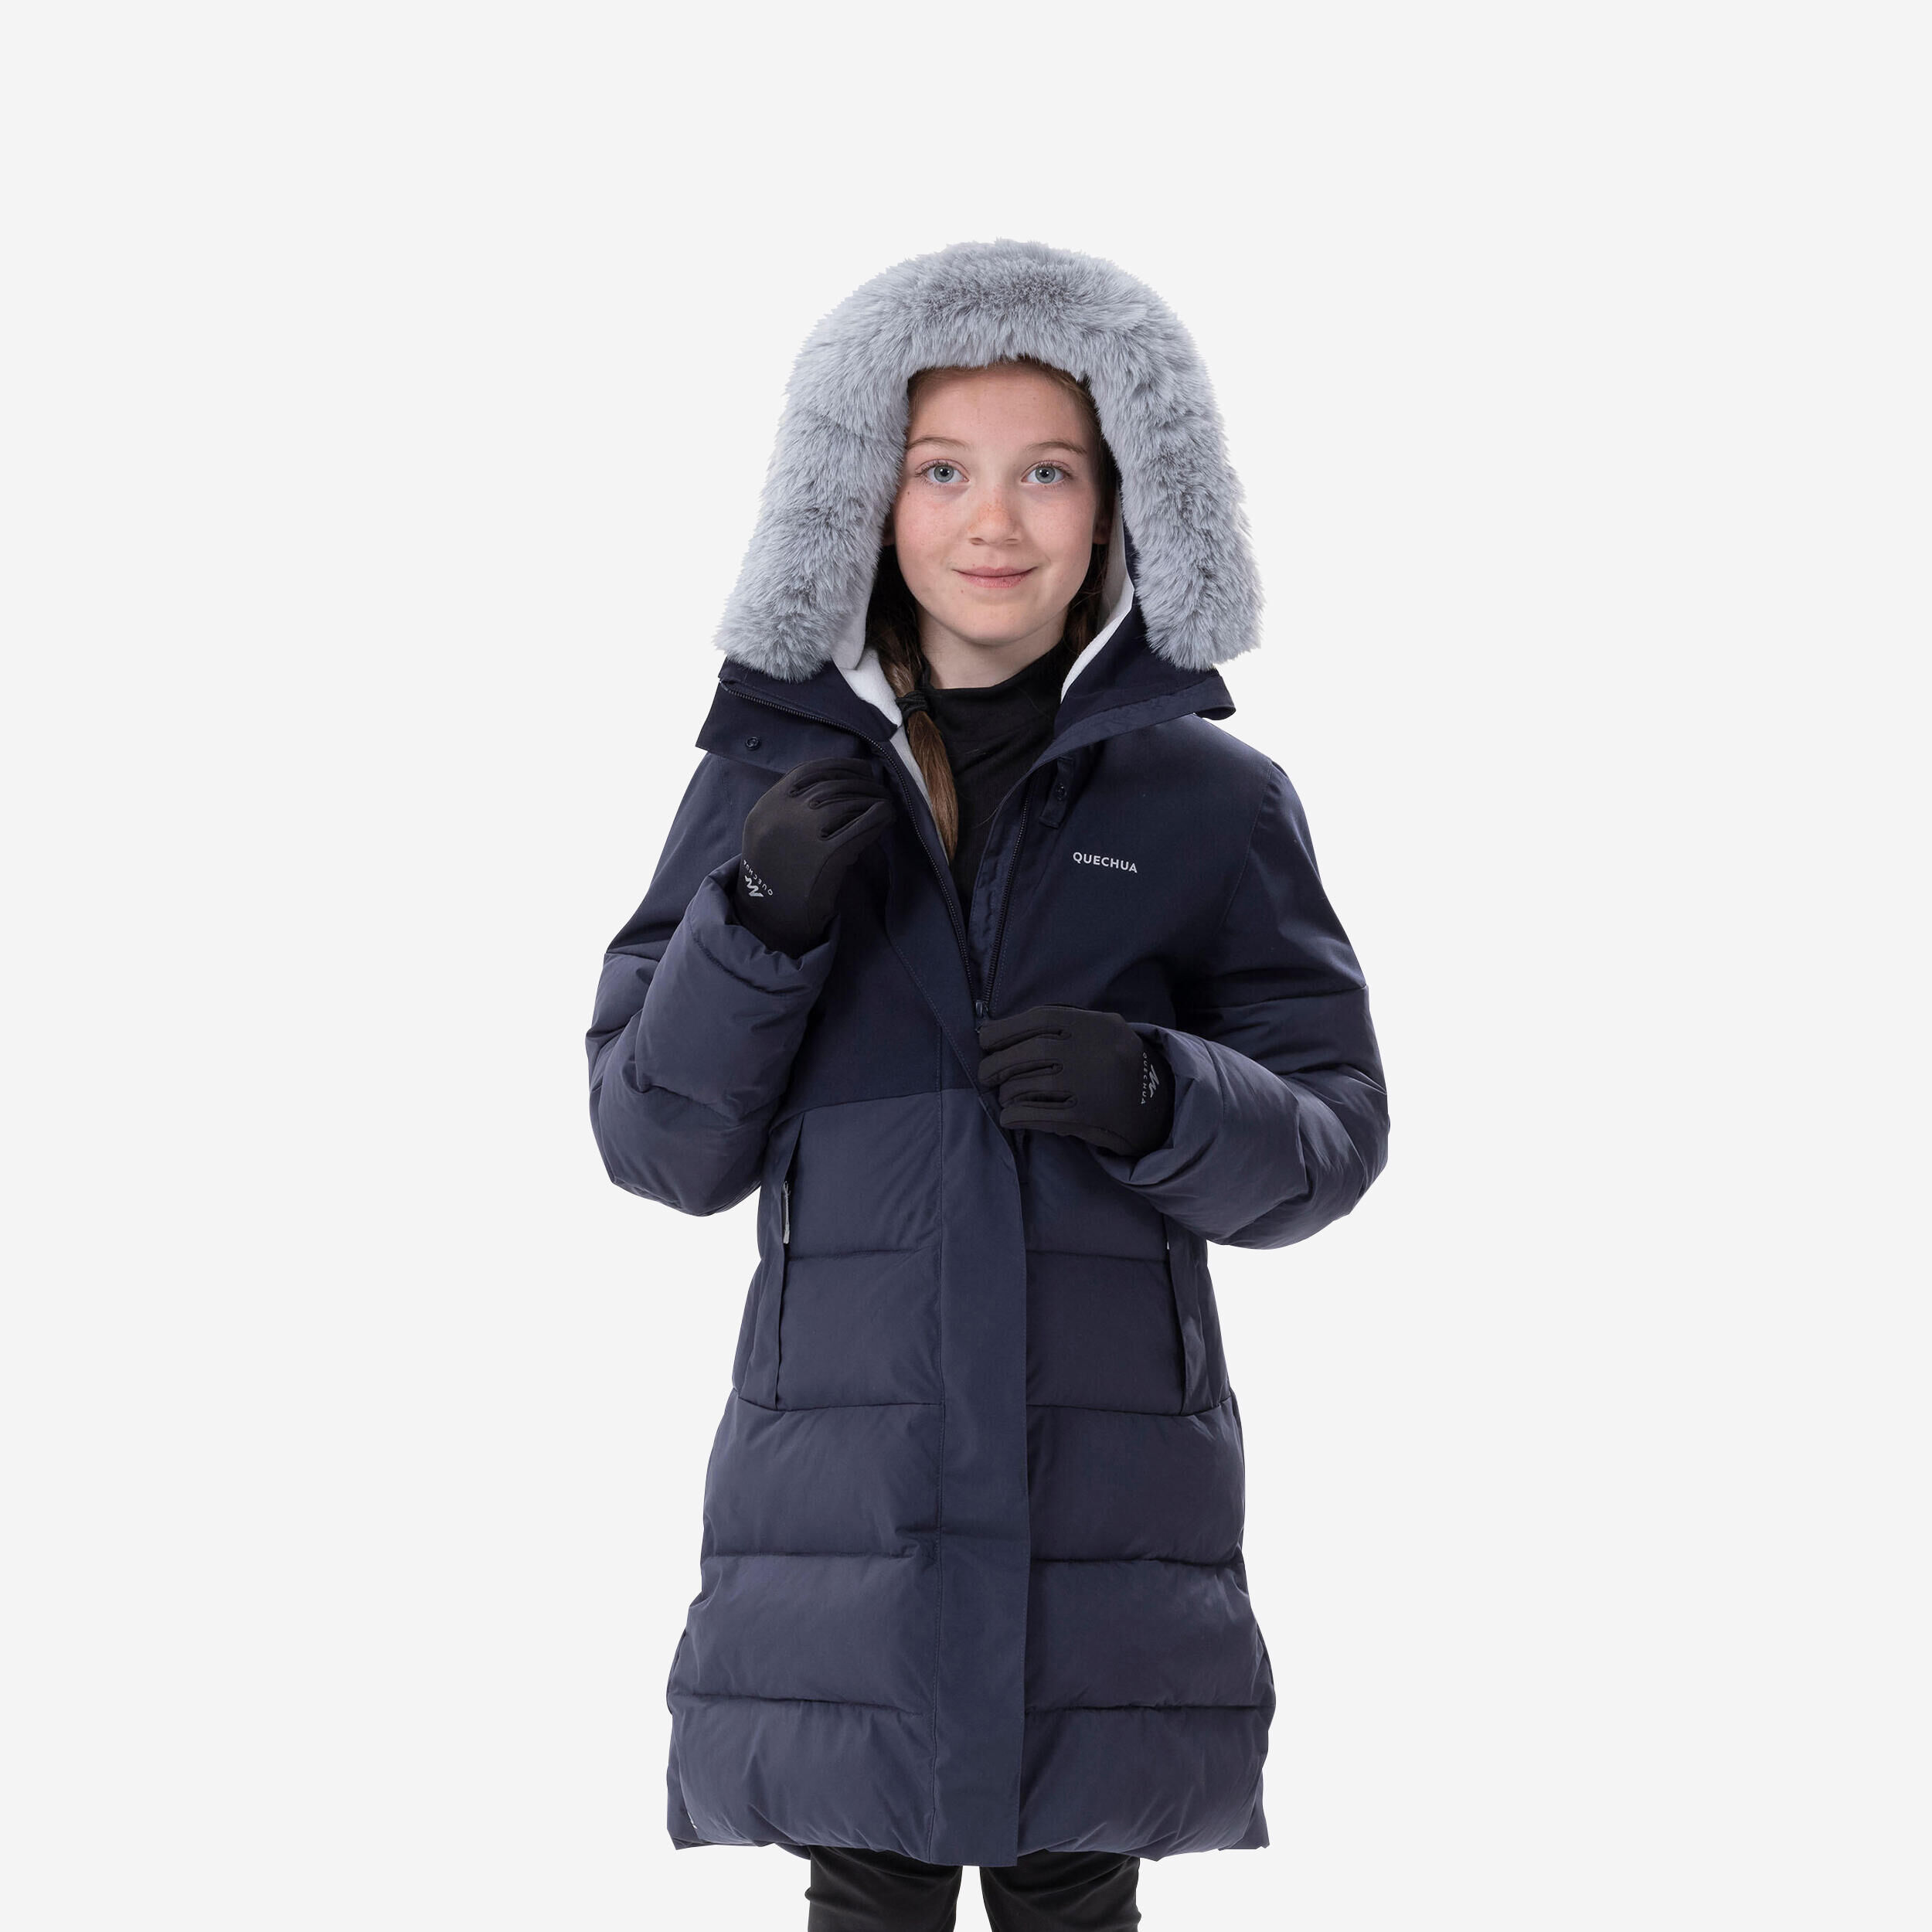 QUECHUA CHILDREN'S SH500 WARM AND WATERPROOF HIKING JACKET -8°C - AGE 7-15